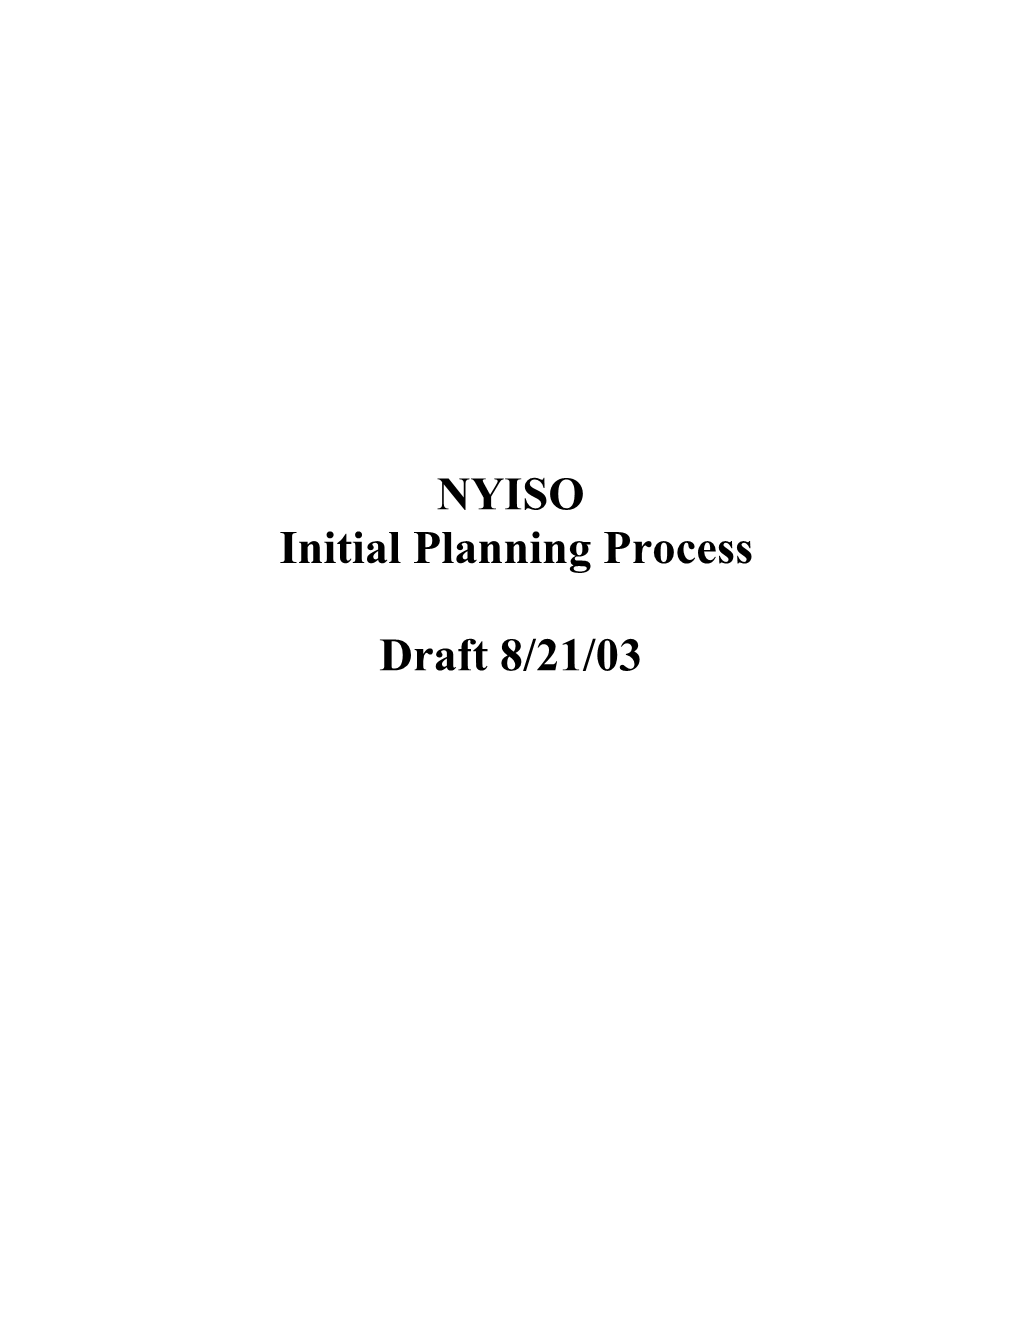 Con Edison Comments Initial Planning Draft